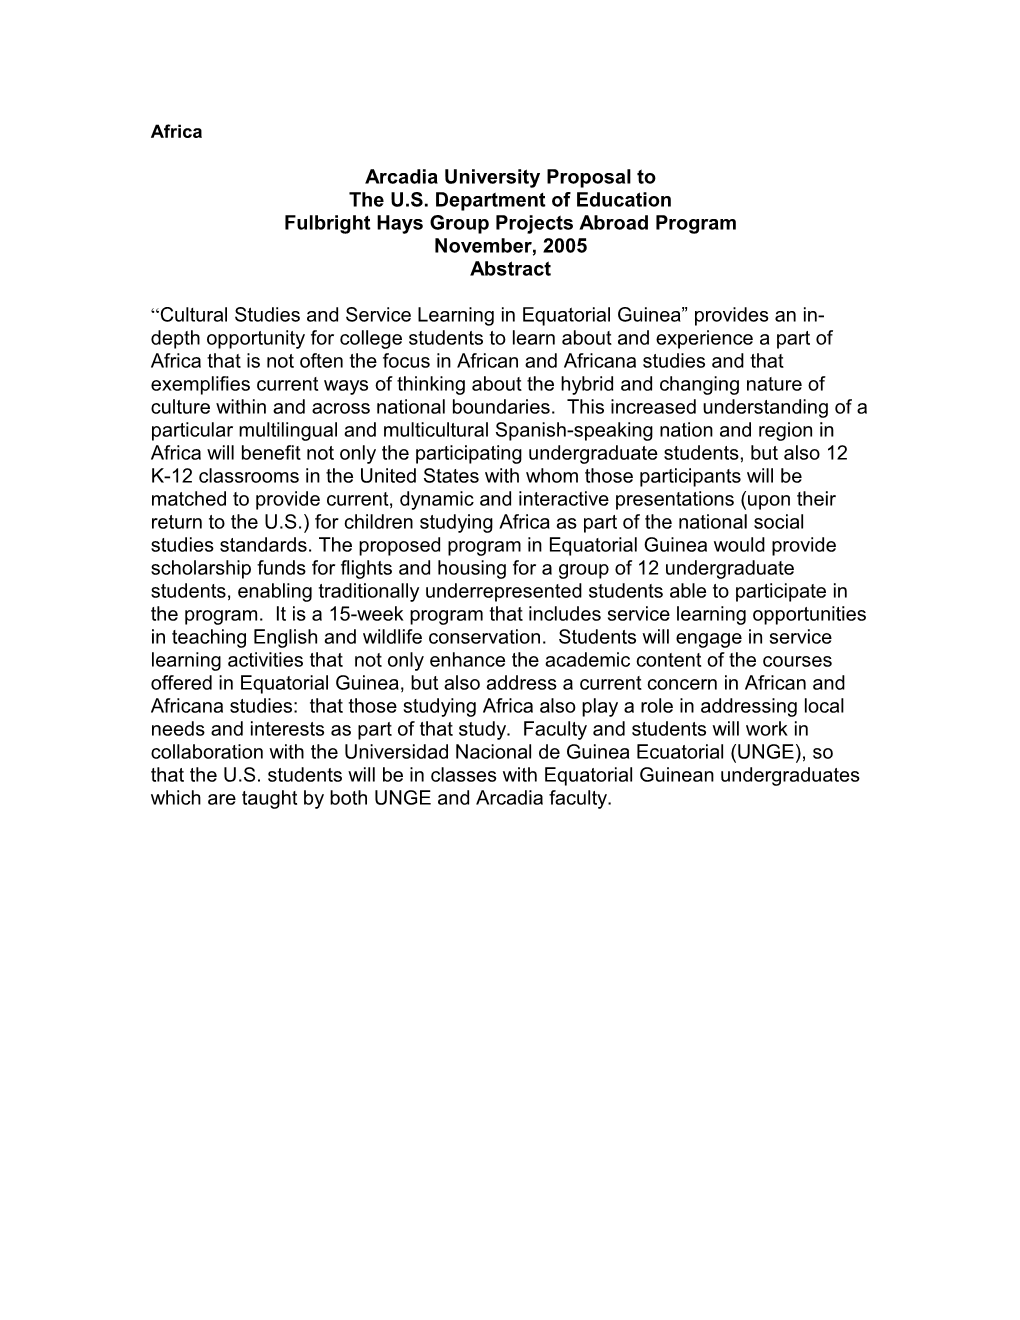 Fulbright-Hays Group Projects Abroad - FY 2006 Project Abstracts (MS Word)